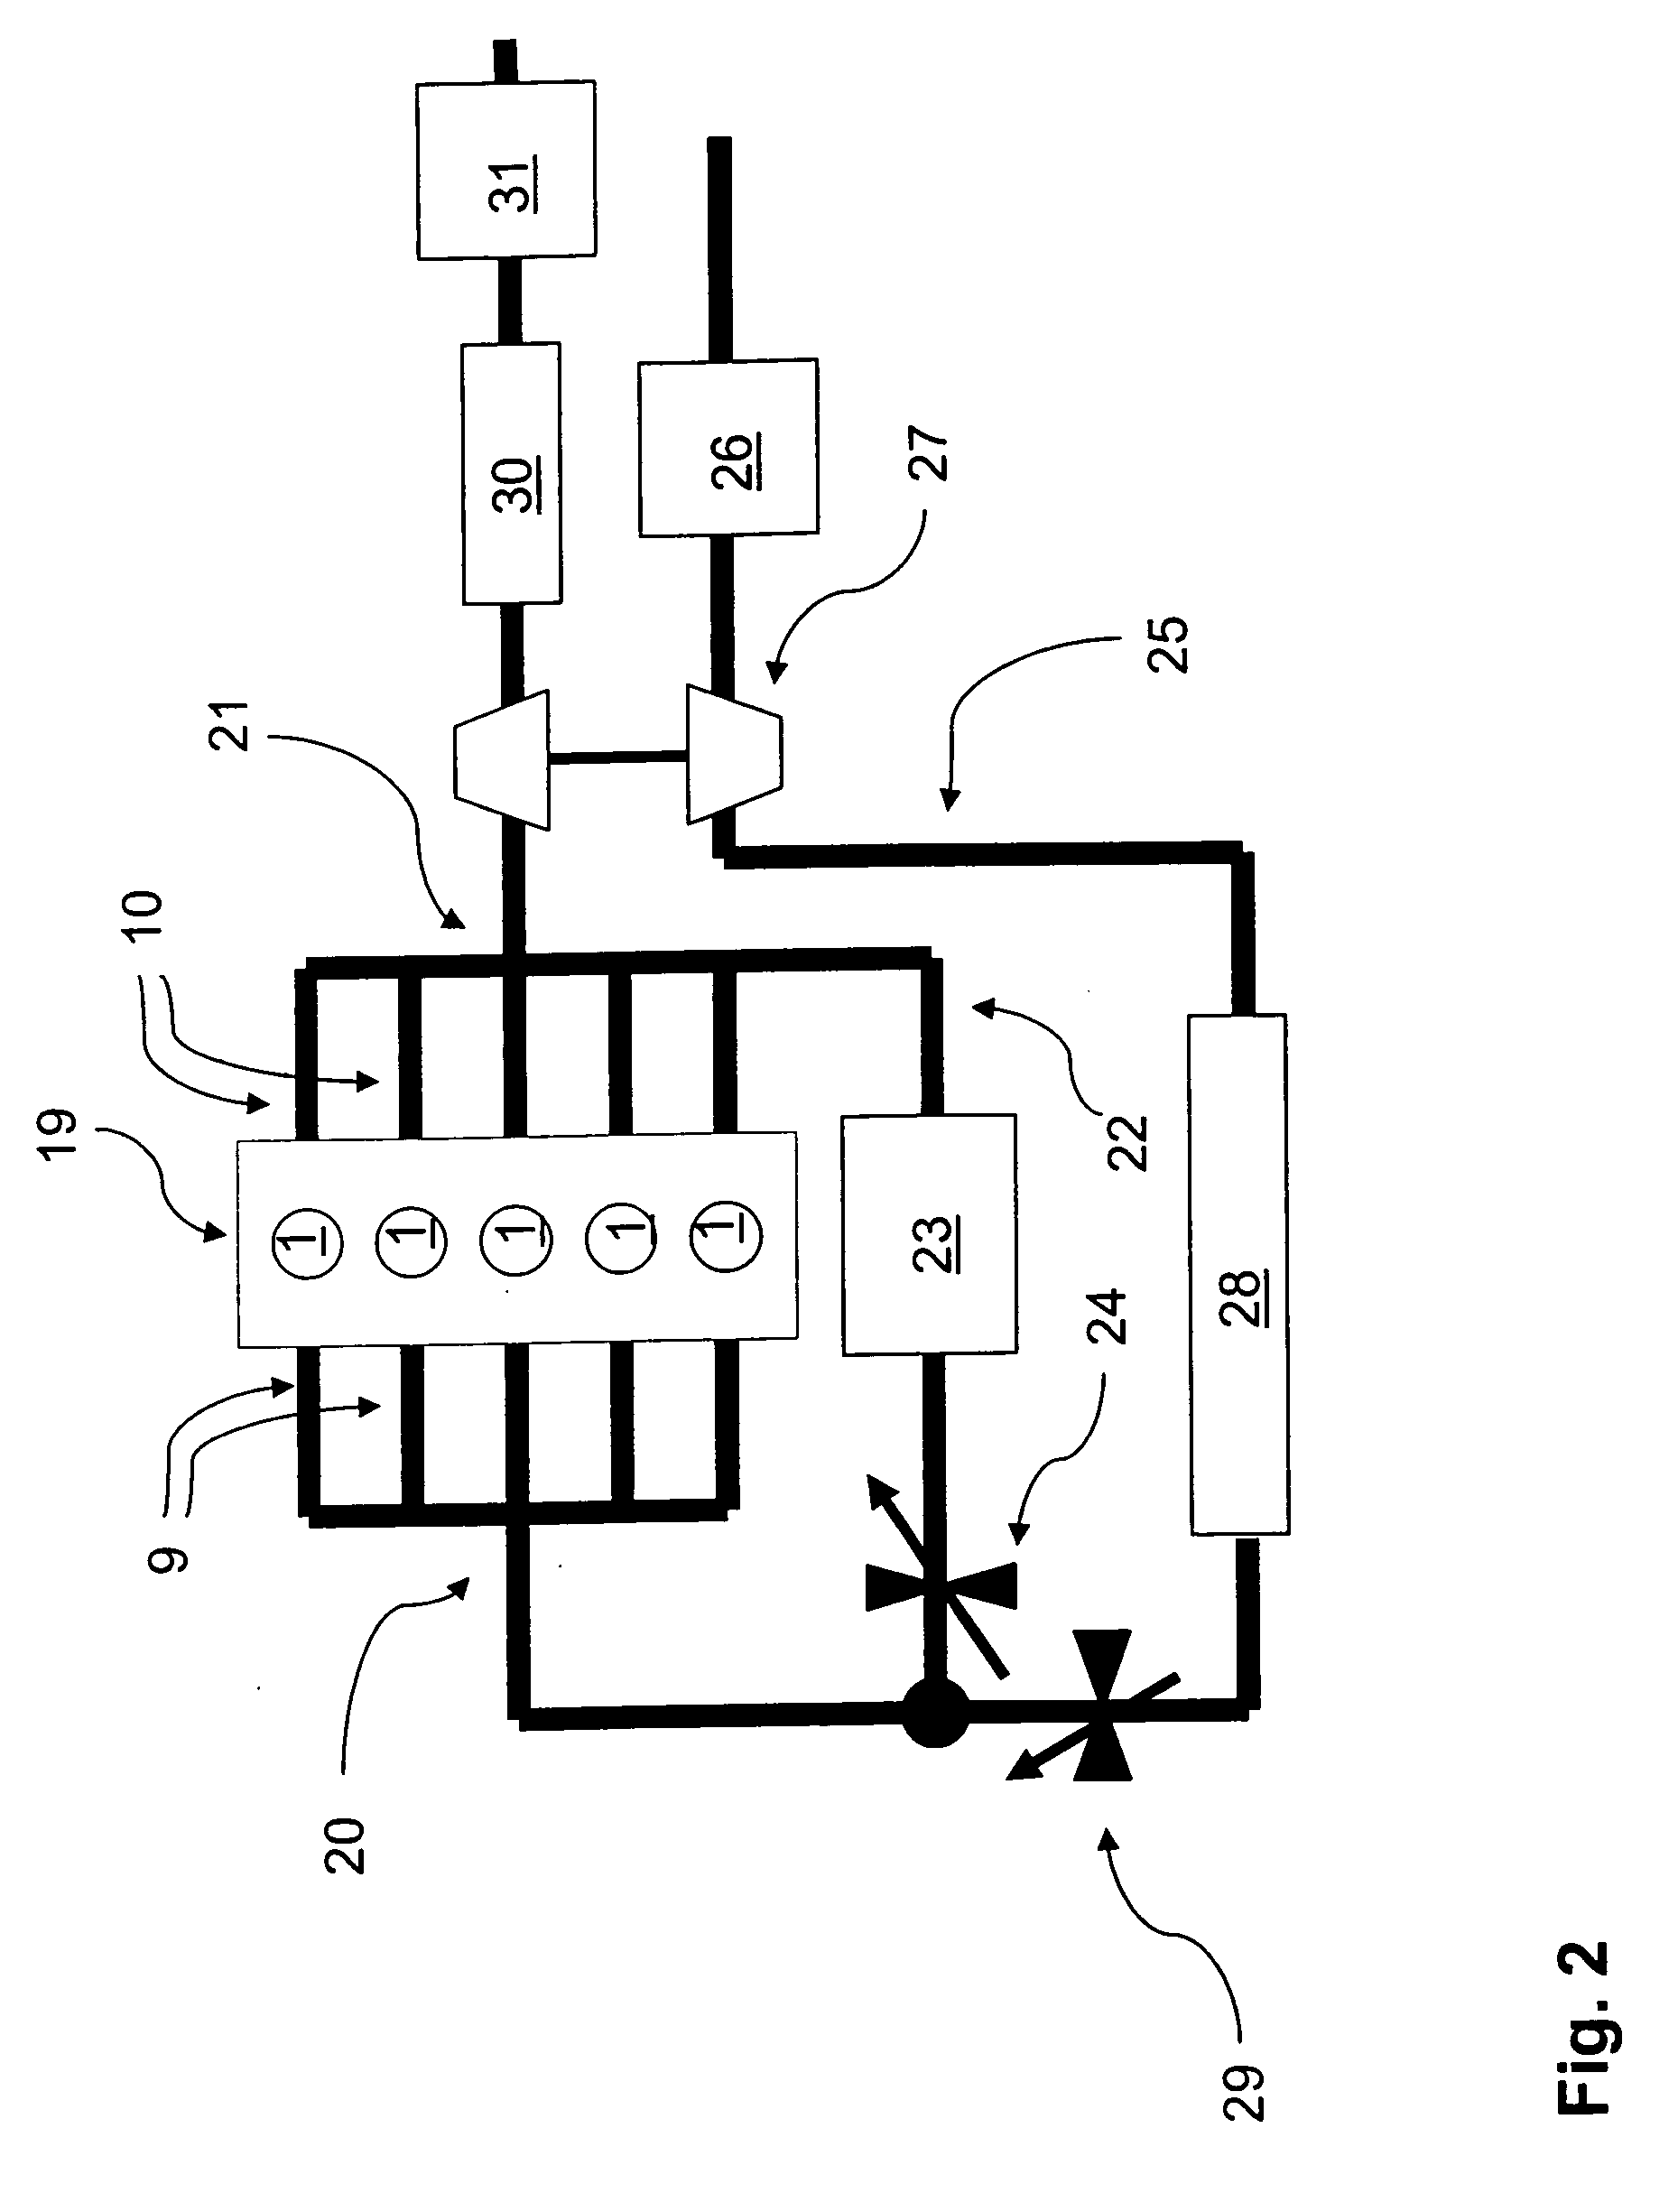 Method for using partial homogeneous charge compression ignition in a diesel internal combustion engine for NOx trap regeneration